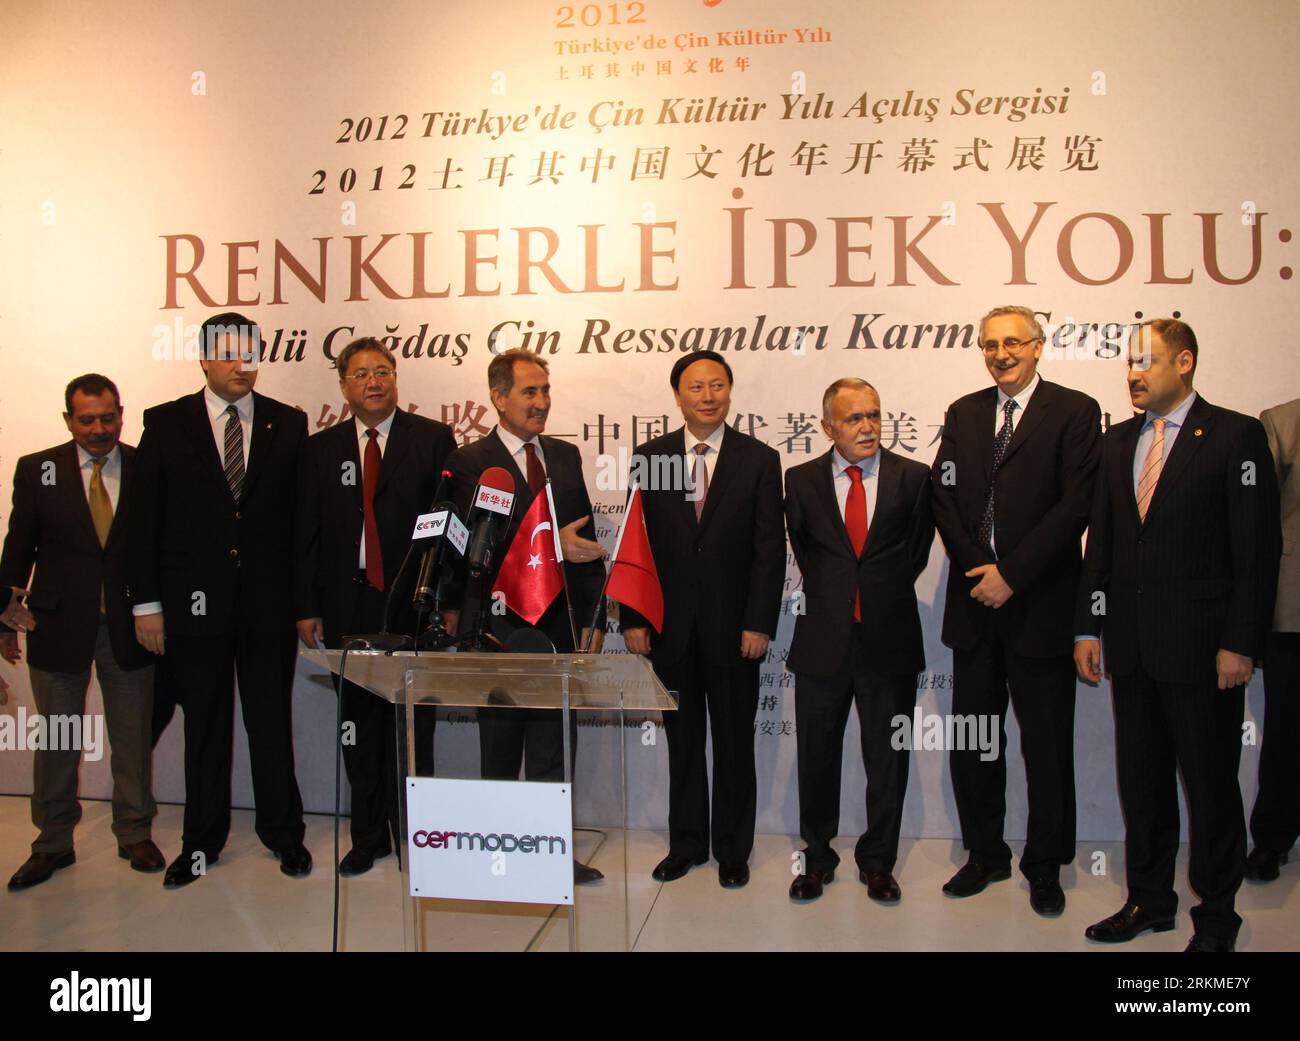 Bildnummer: 56691850  Datum: 12.12.2011  Copyright: imago/Xinhua (111212) -- ANKARA, Dec. 12, 2011 (Xinhua) -- Turkish Minister of Culture and Tourism Ertugrul Gunay (4th. L), Chinese Vice Minister of Culture Yang Zhijin (4th. R) and Chinese Ambassador to Turkey Gong Xiaosheng (3th. L) attend the opening ceremony of the 2012 China Culture Year in Ankara, Turkey, Dec. 12, 2011. Under the agreement between China and Turkey, the two countries will host the culture year in Turkey in 2012 and in China in 2013. (Xinhua/Wang Hongjiang) TURKEY-ANKARA-CHINA CULTURE YEAR PUBLICATIONxNOTxINxCHN People Po Stock Photo